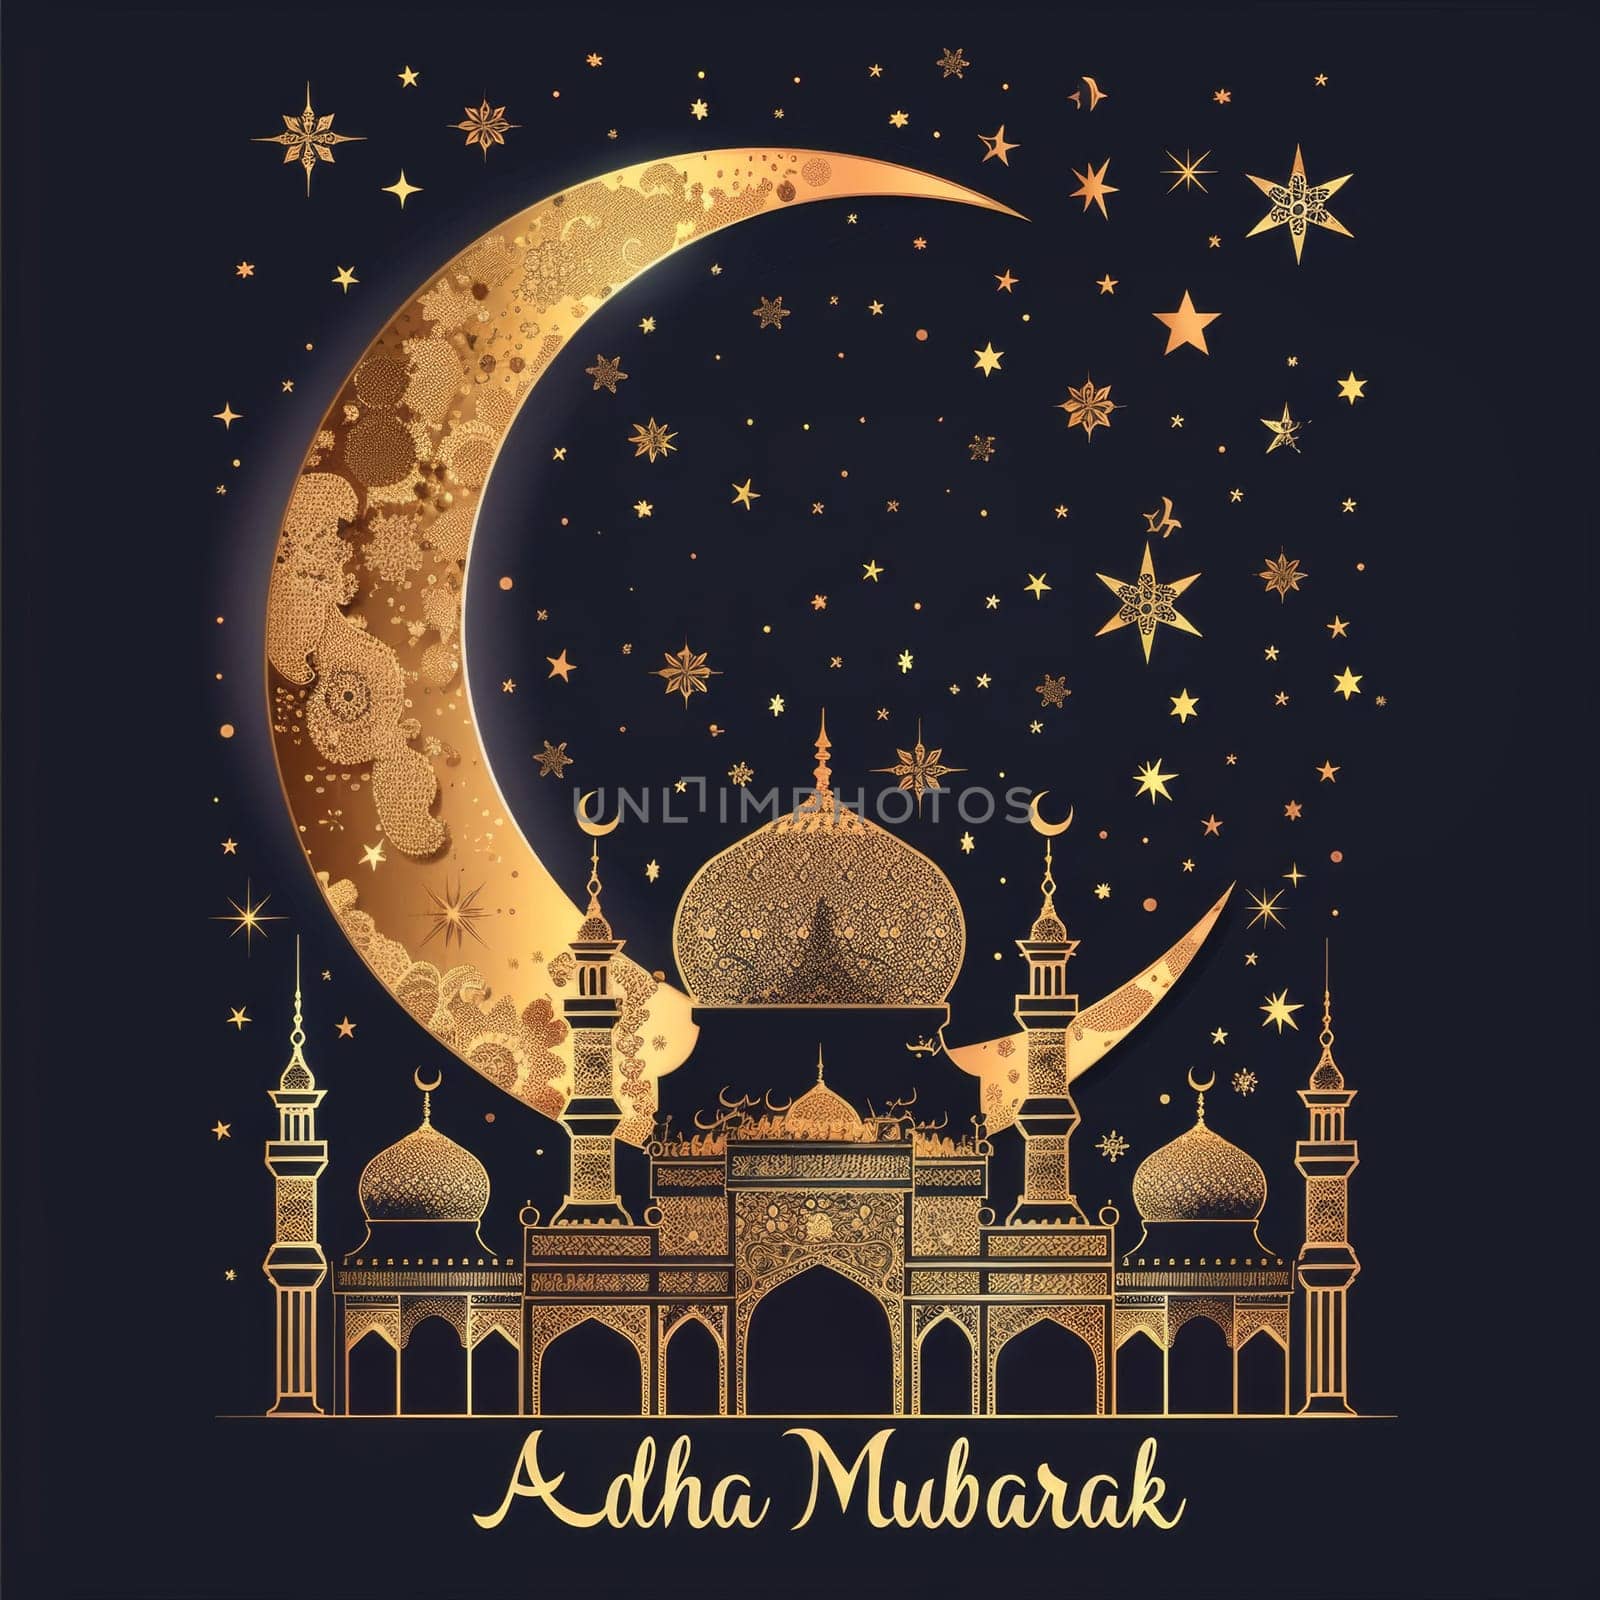 A captivating Eid Adha Mubarak greeting featuring an ornate crescent moon and stars over a silhouette of mosques